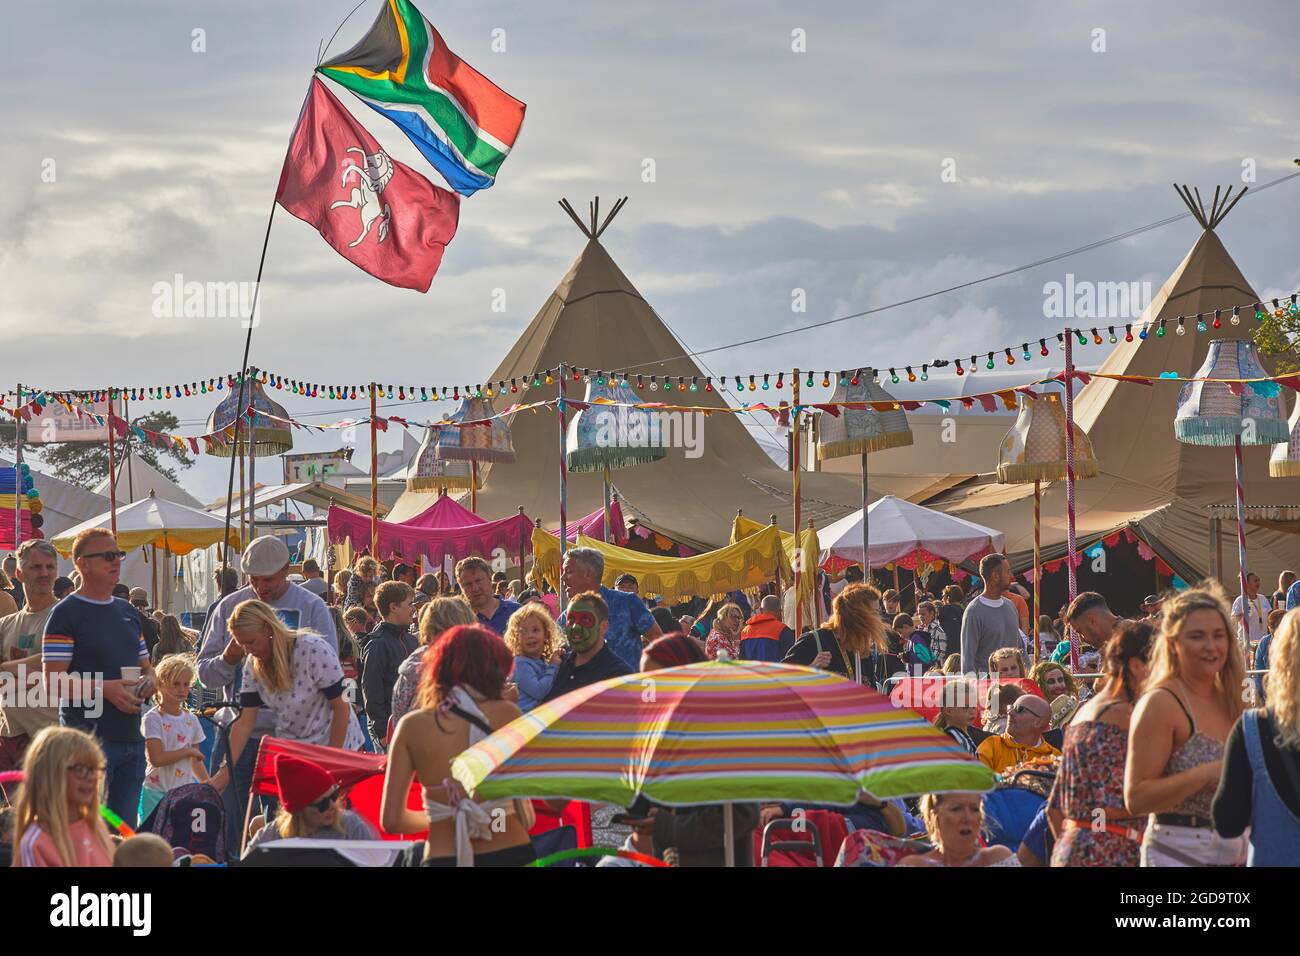 Crowds and teepee at a summer music festival. Camp Bestival,  Lulworth, Dorset, Great Britain. Stock Photo